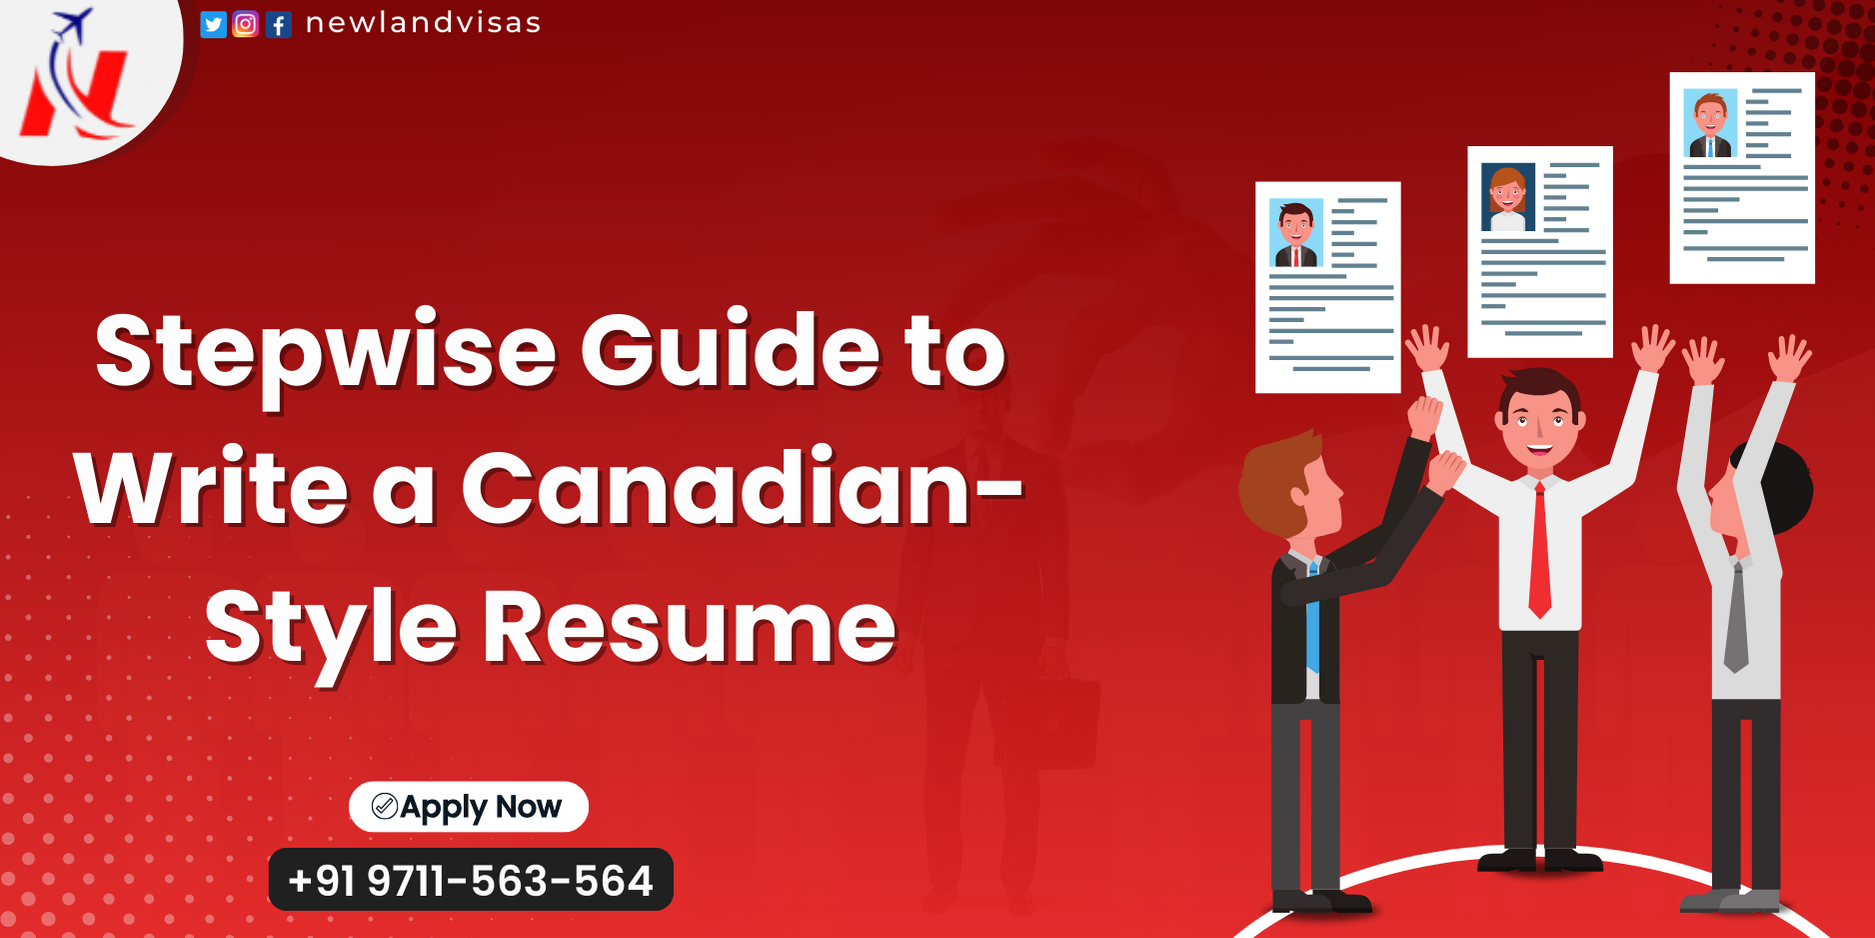 Stepwise Guide to Write a Canadian-Style Resume